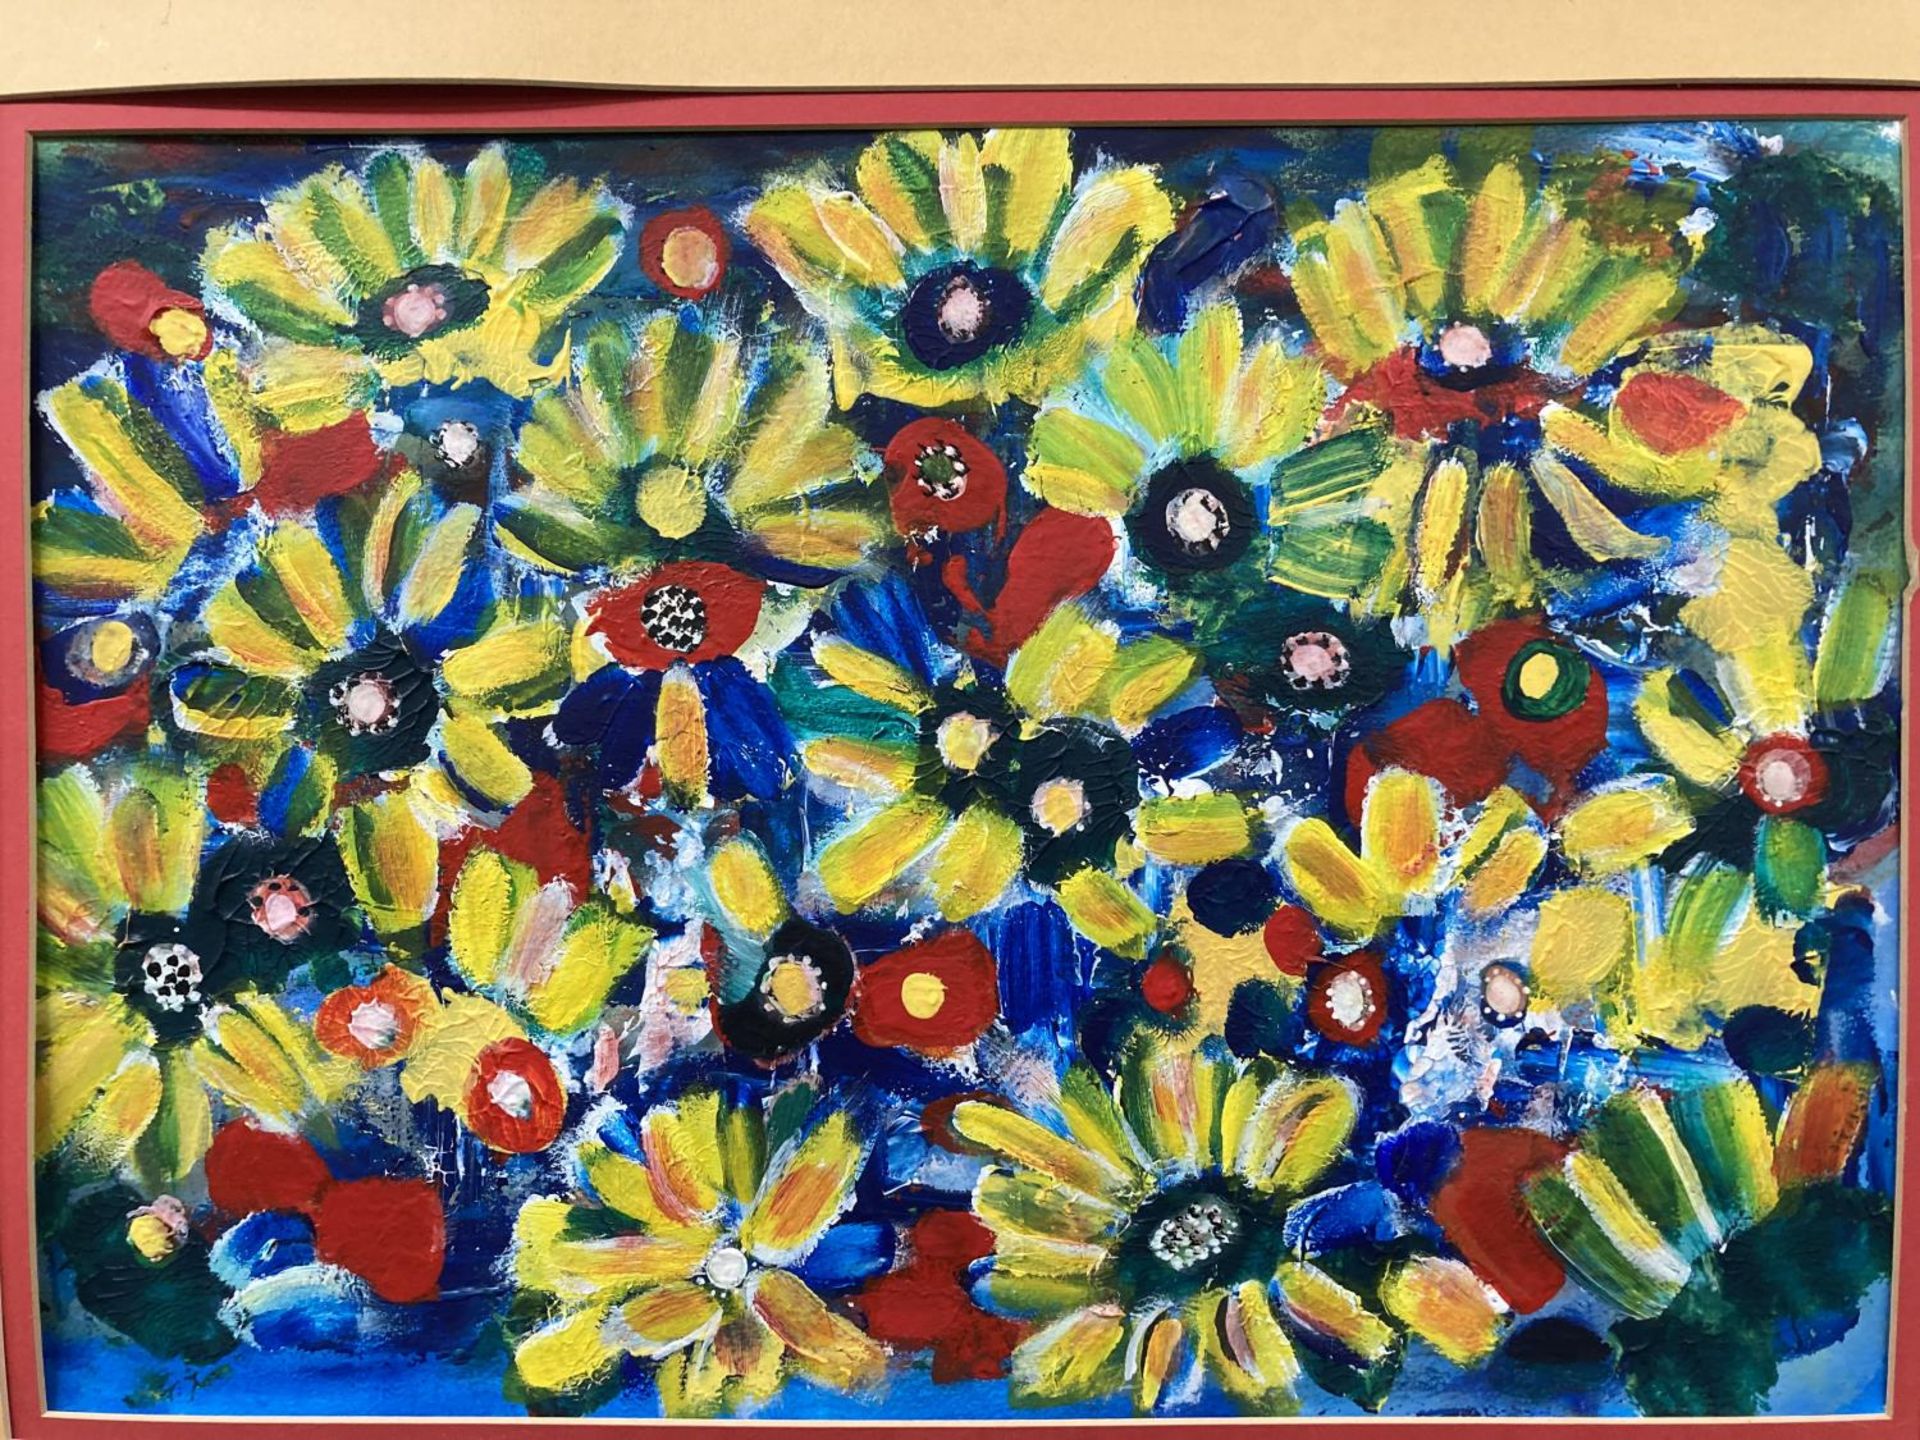 AN ORIGINAL FRAMED OIL ON CANVAS DEPICTING FLOWERS - Image 2 of 3